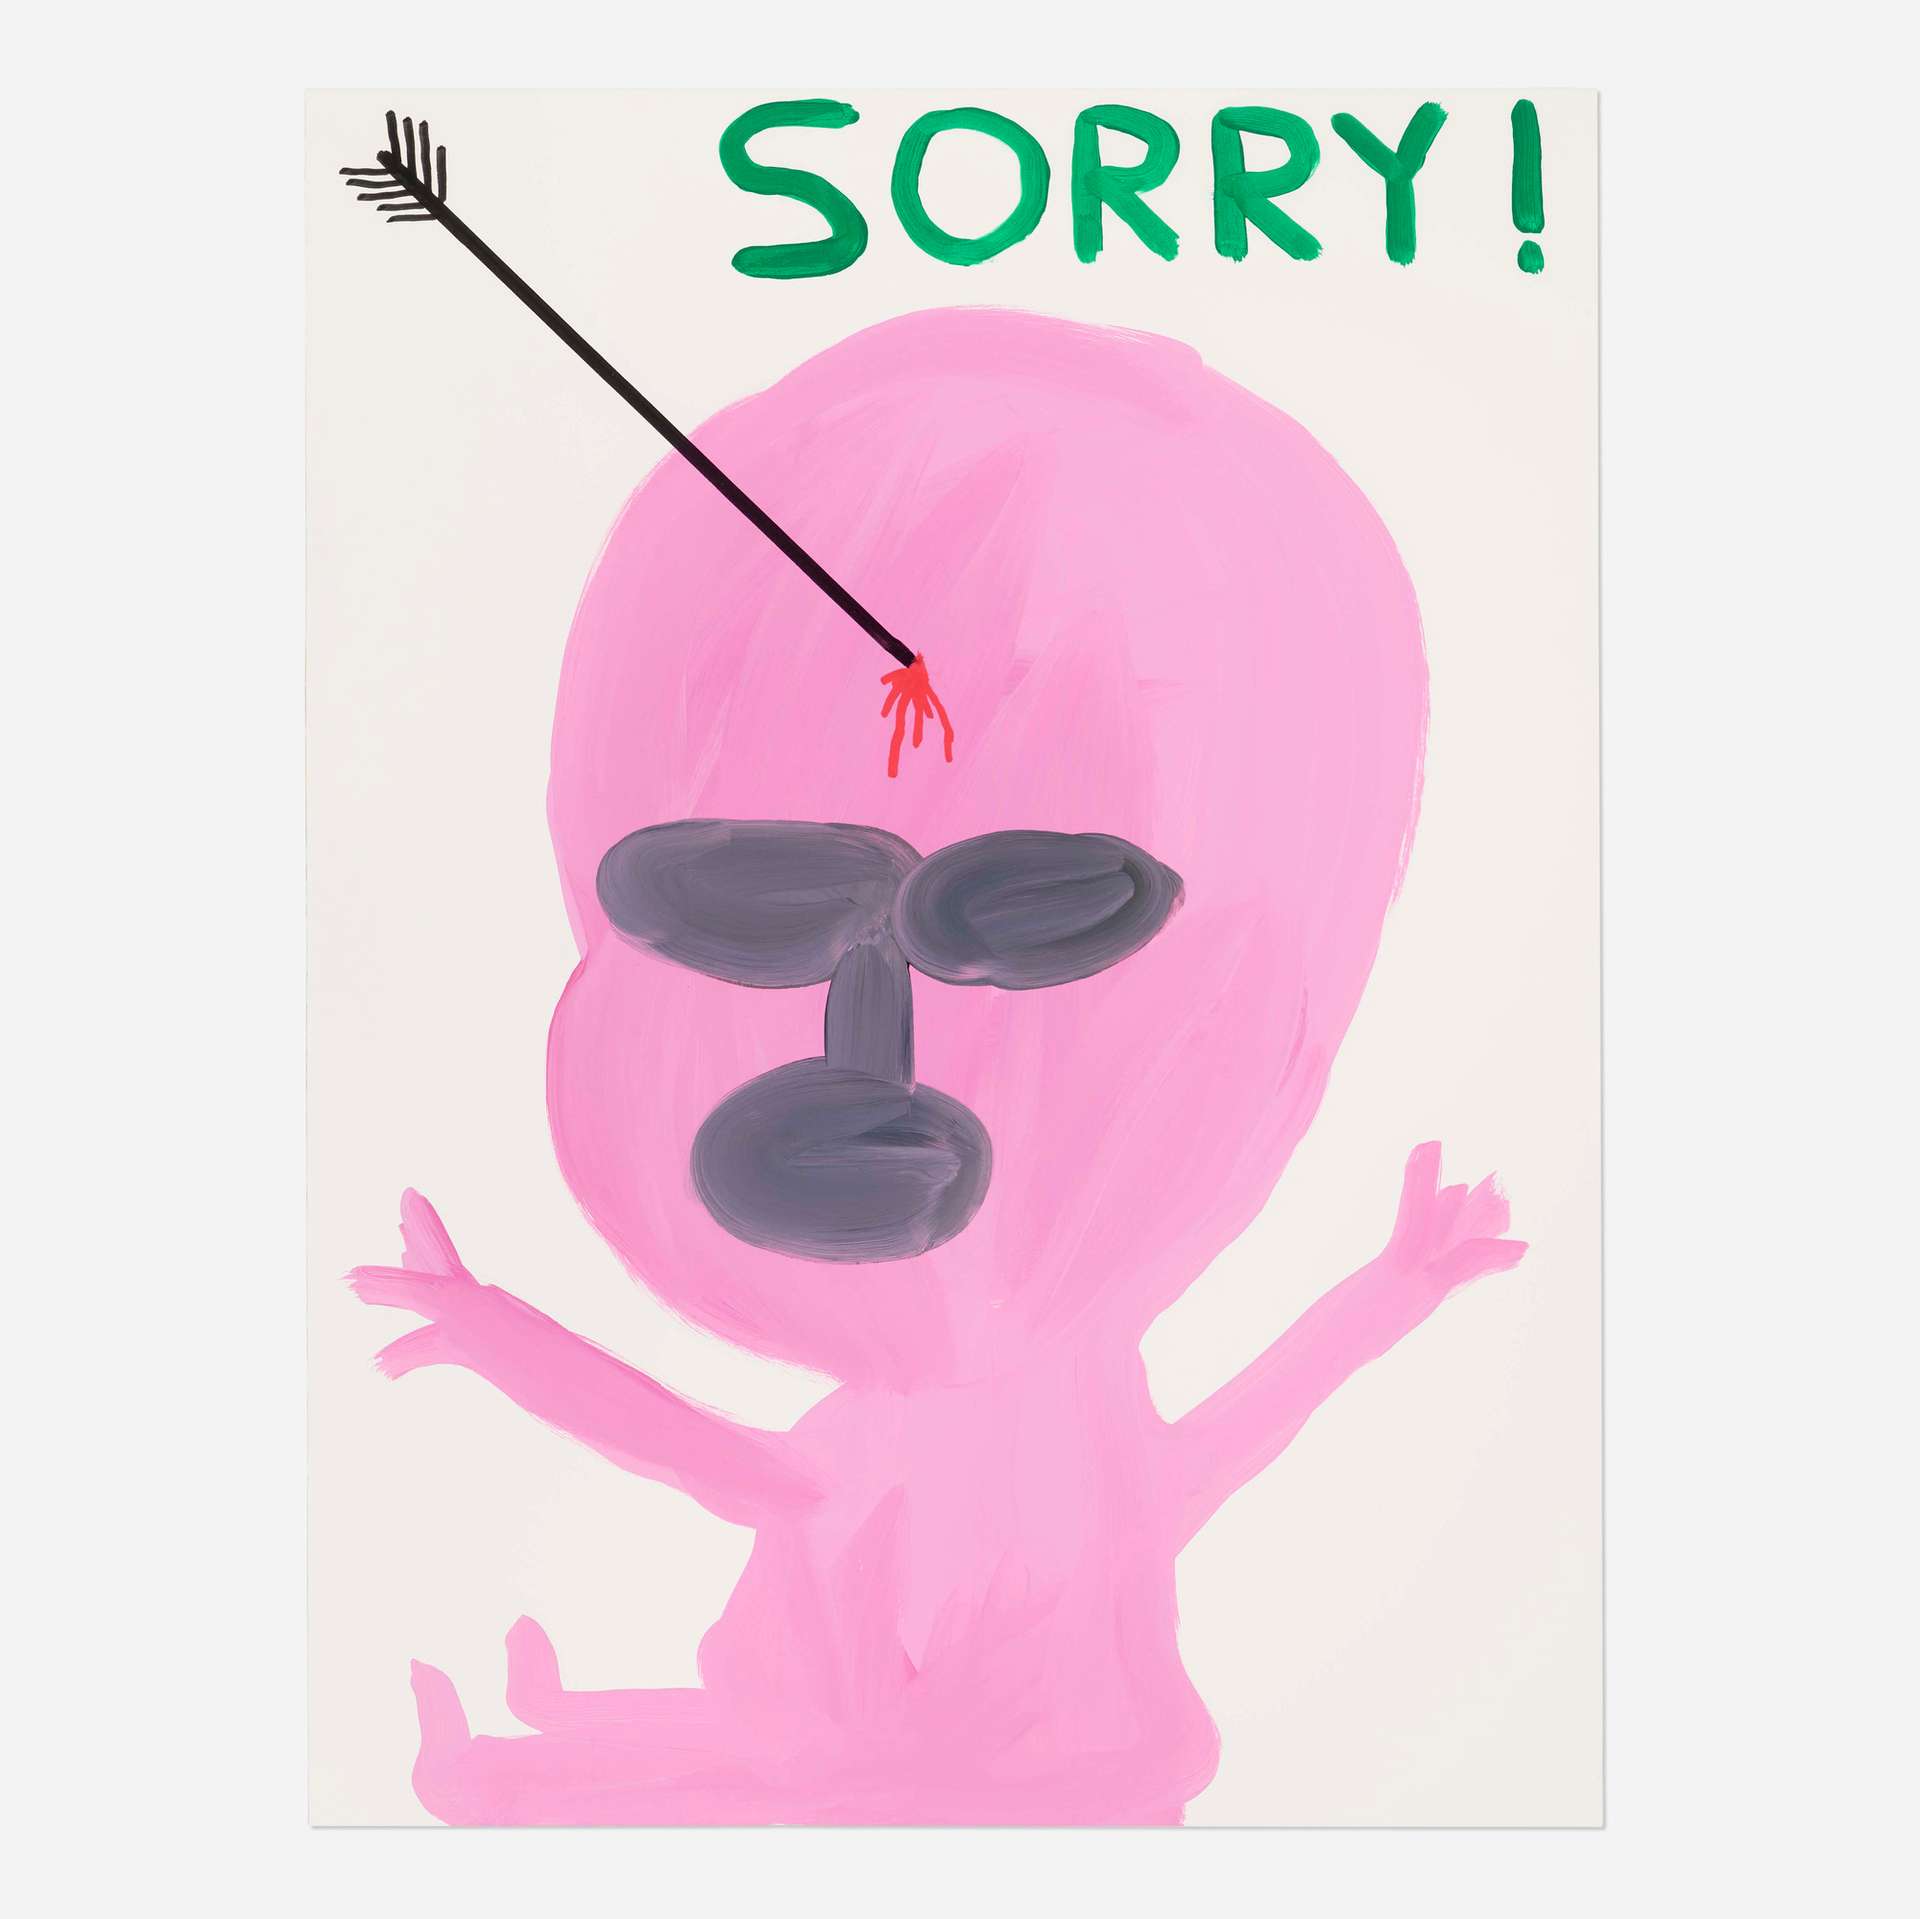 A print of David Shrigley’s Sorry! A pink infant looking figure with its hands extended out. There is an arrow in the middle of the figure’s head with a small amount of blood dripping. Above the figure reads the text “Sorry!”